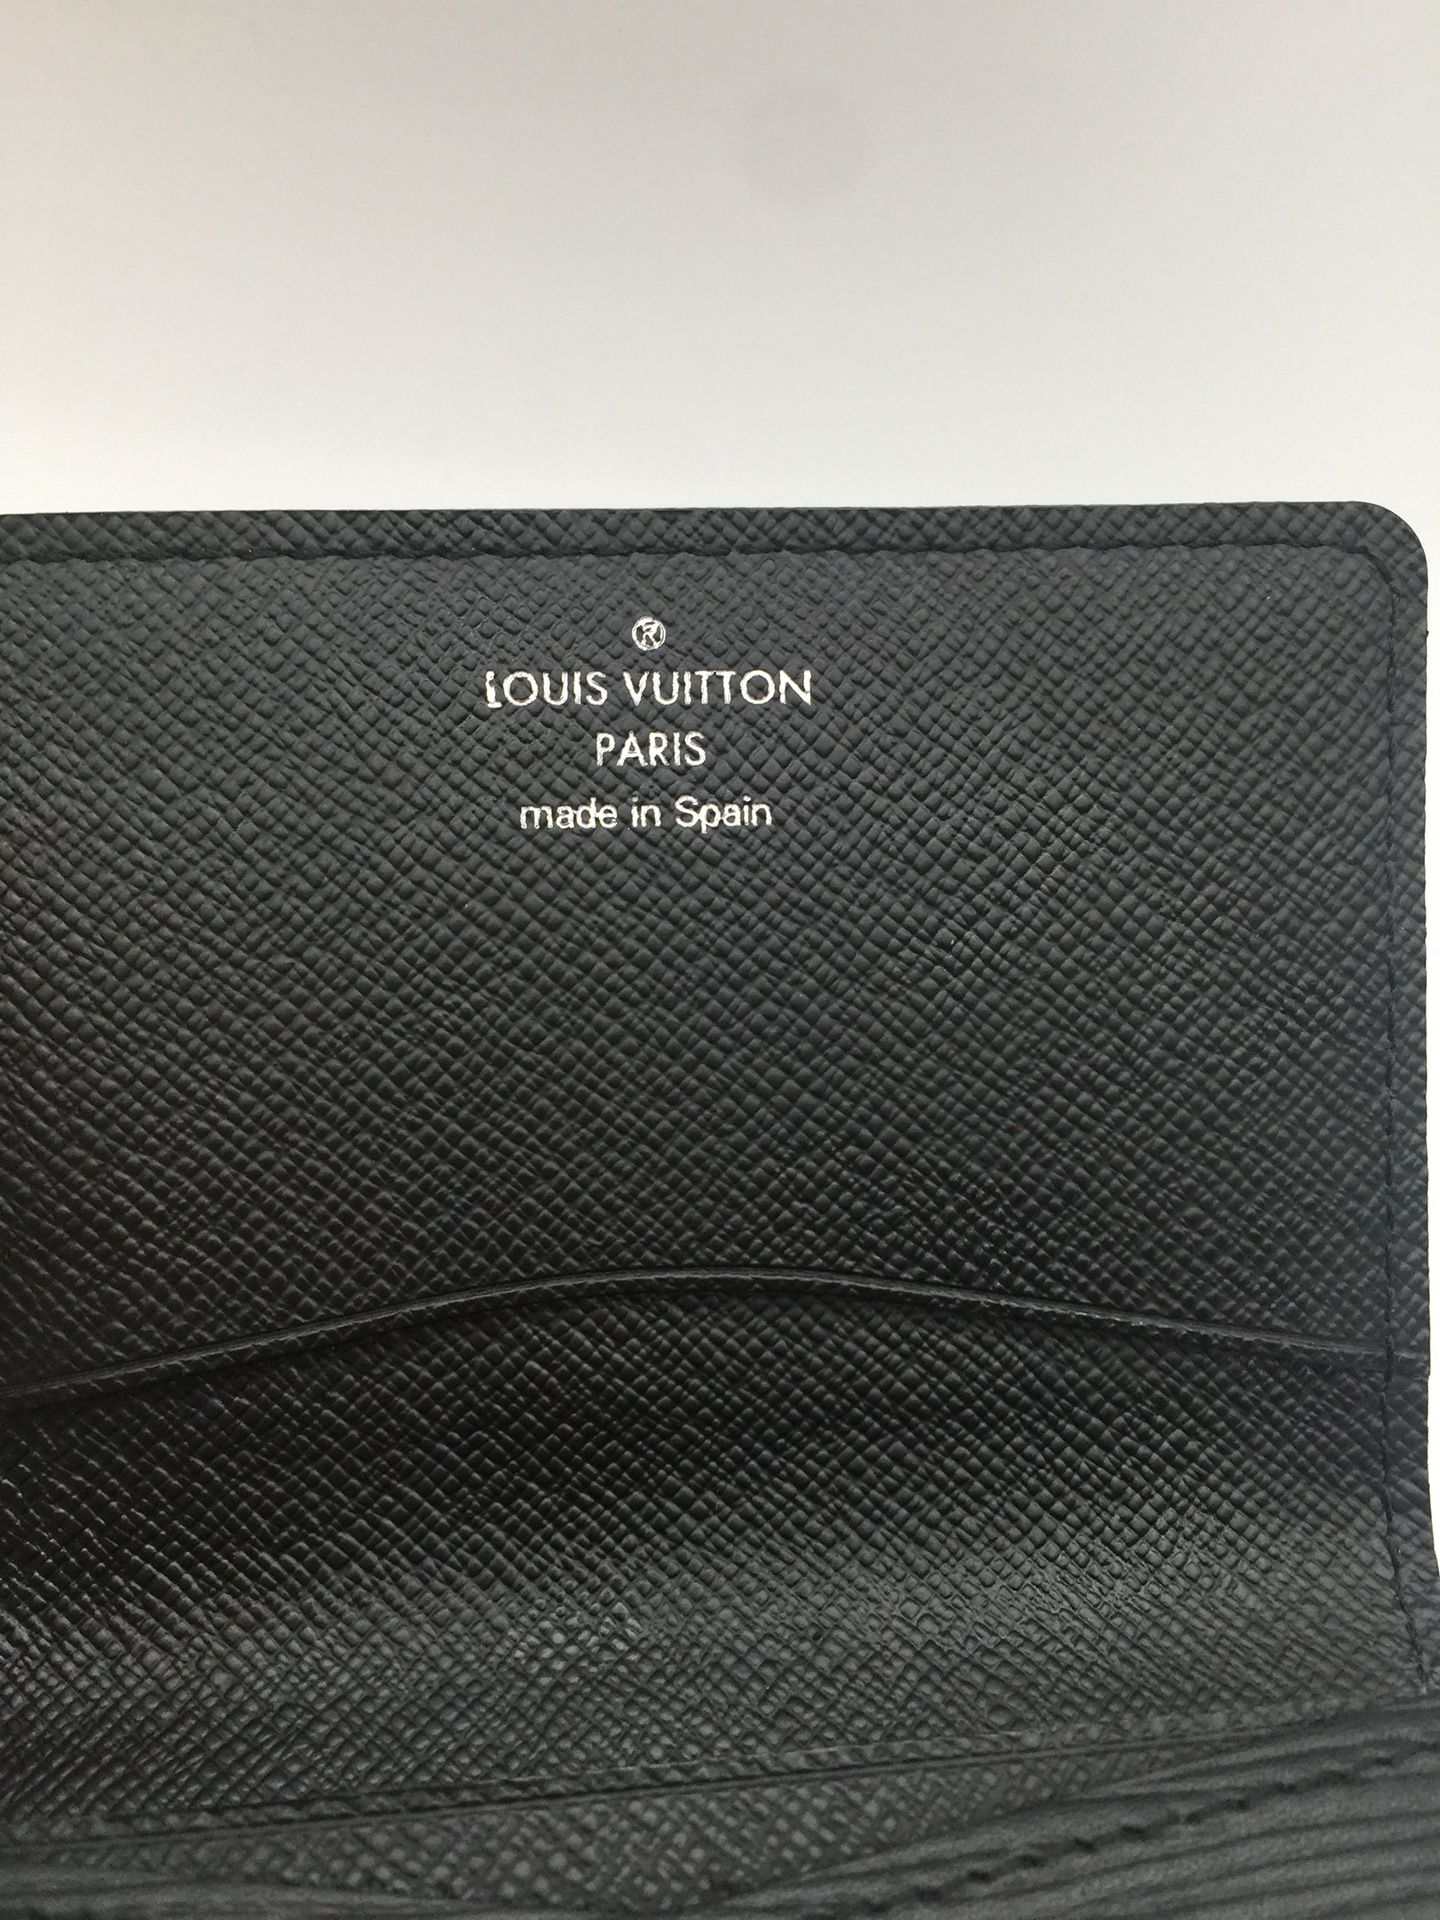 Authentic LV Card Holder for Sale in Covina, CA - OfferUp